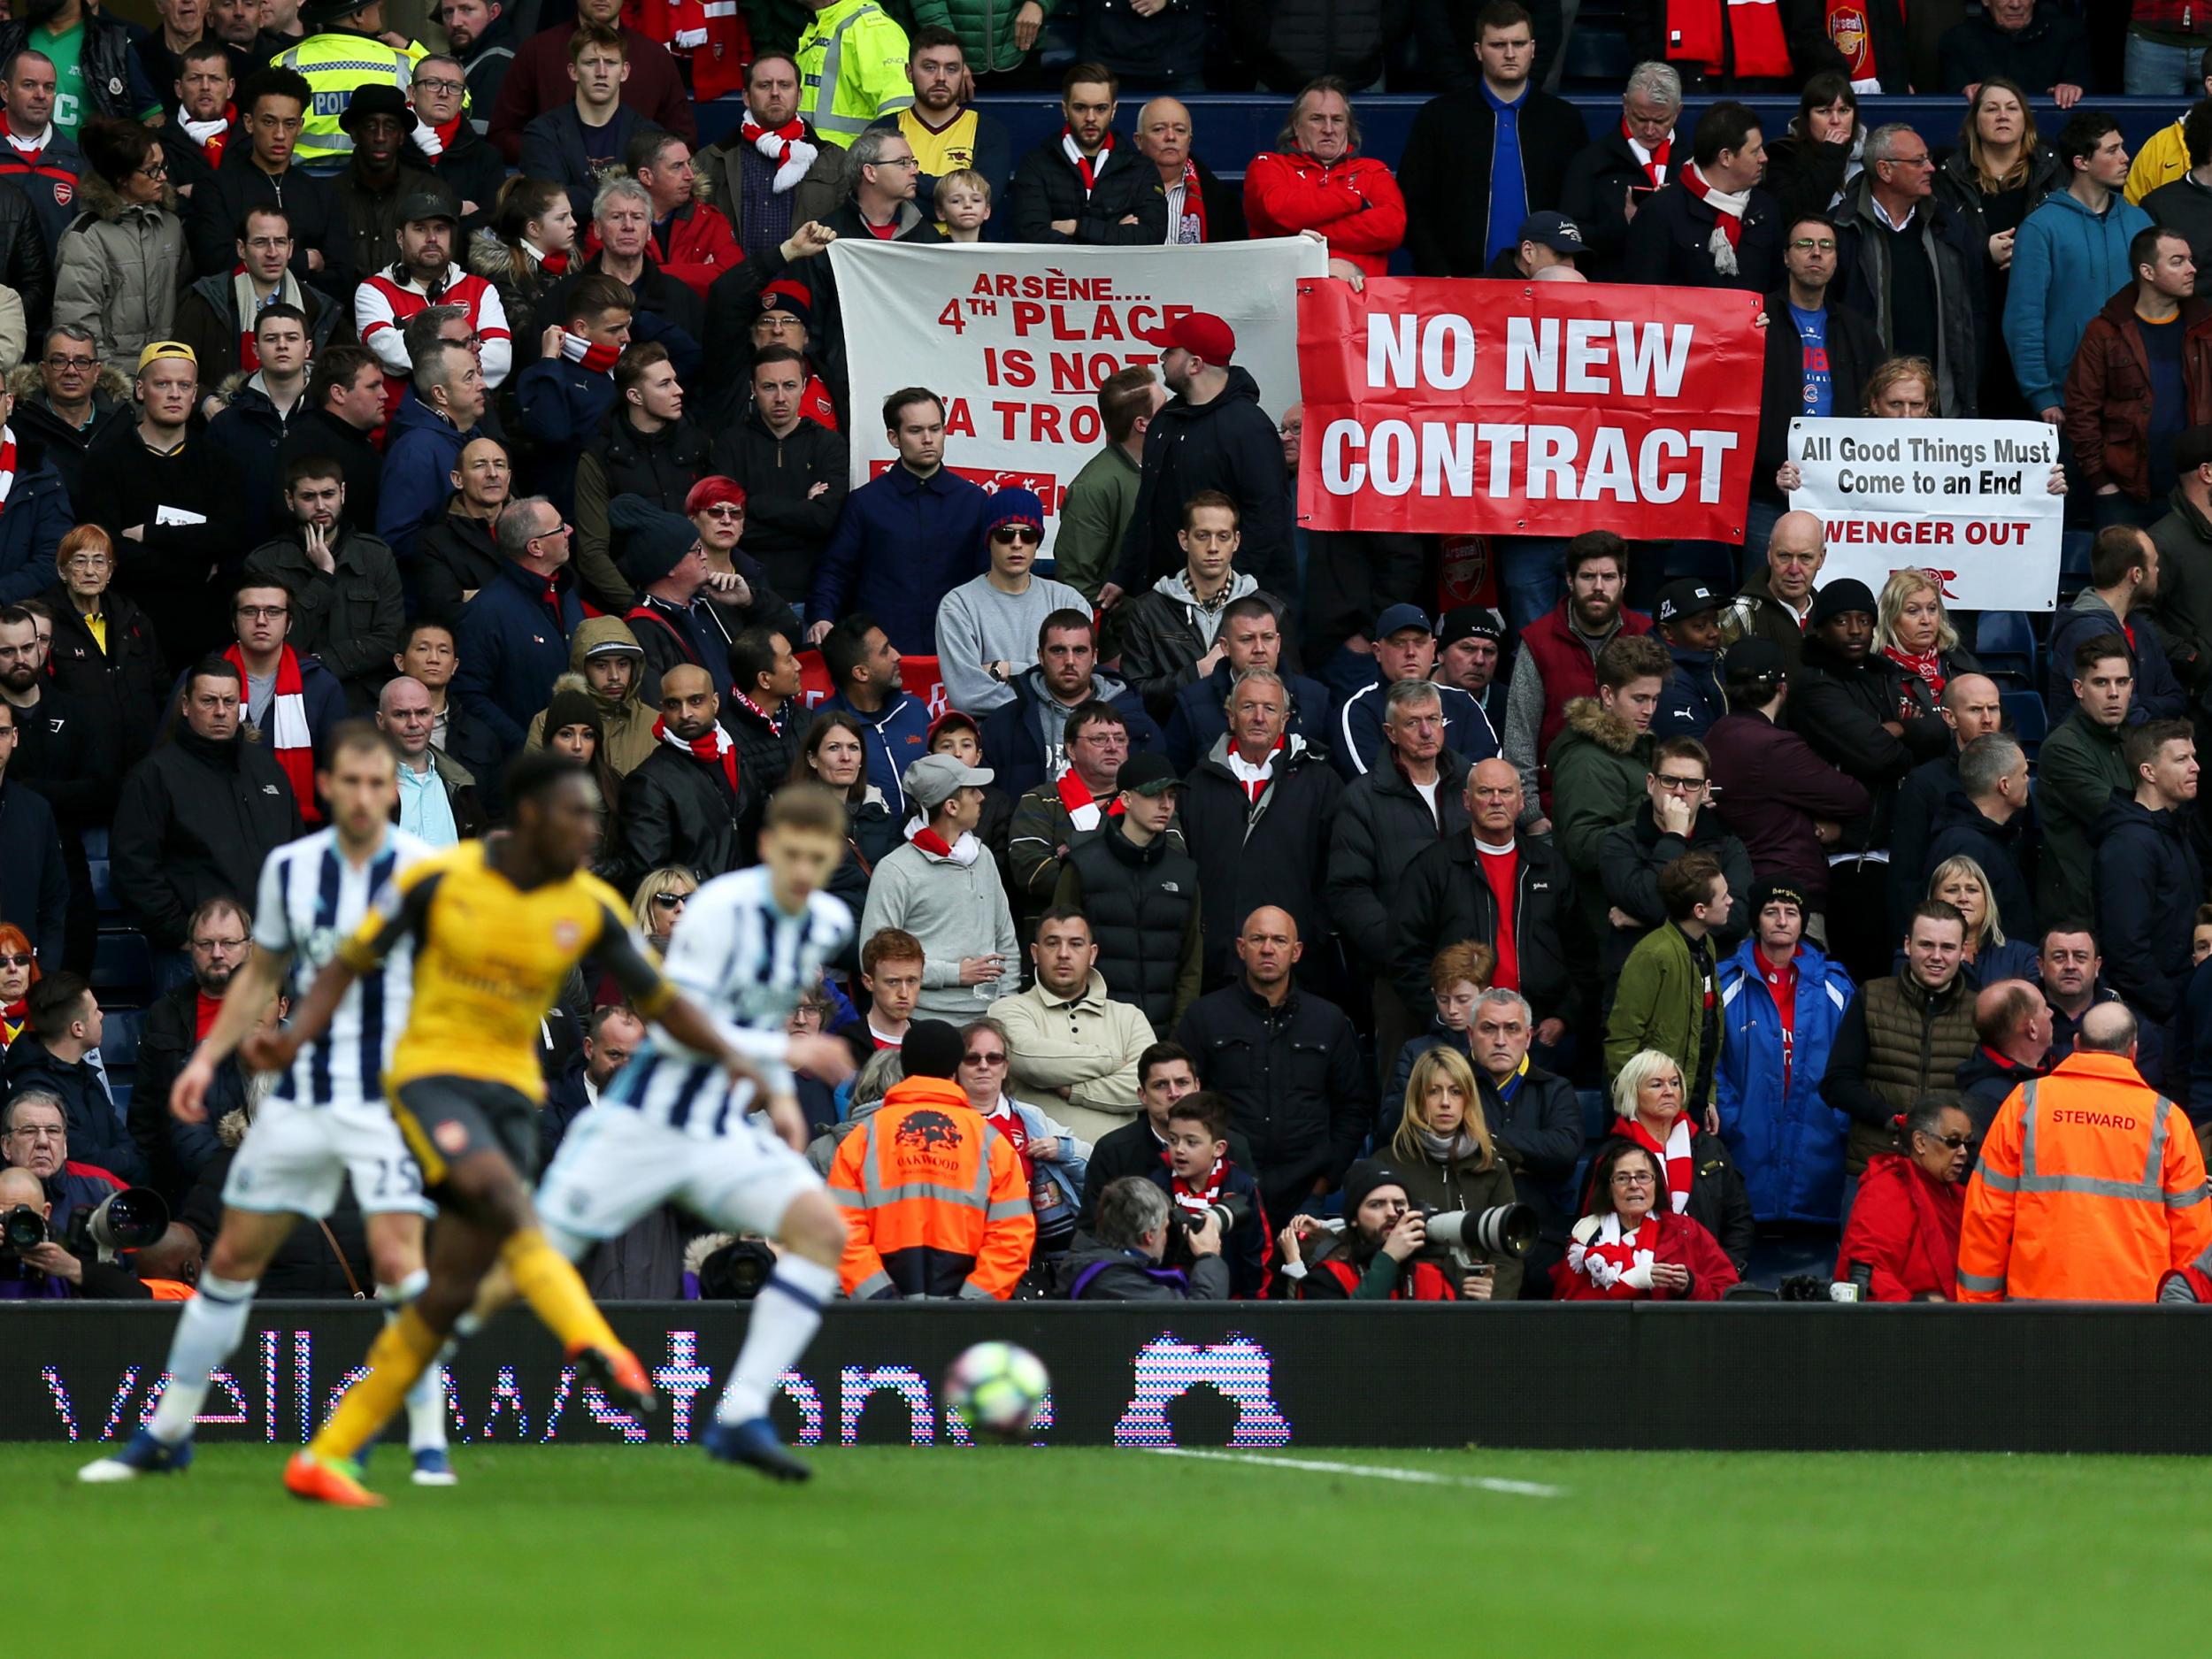 Arsenal's travelling support made their disgruntlement known